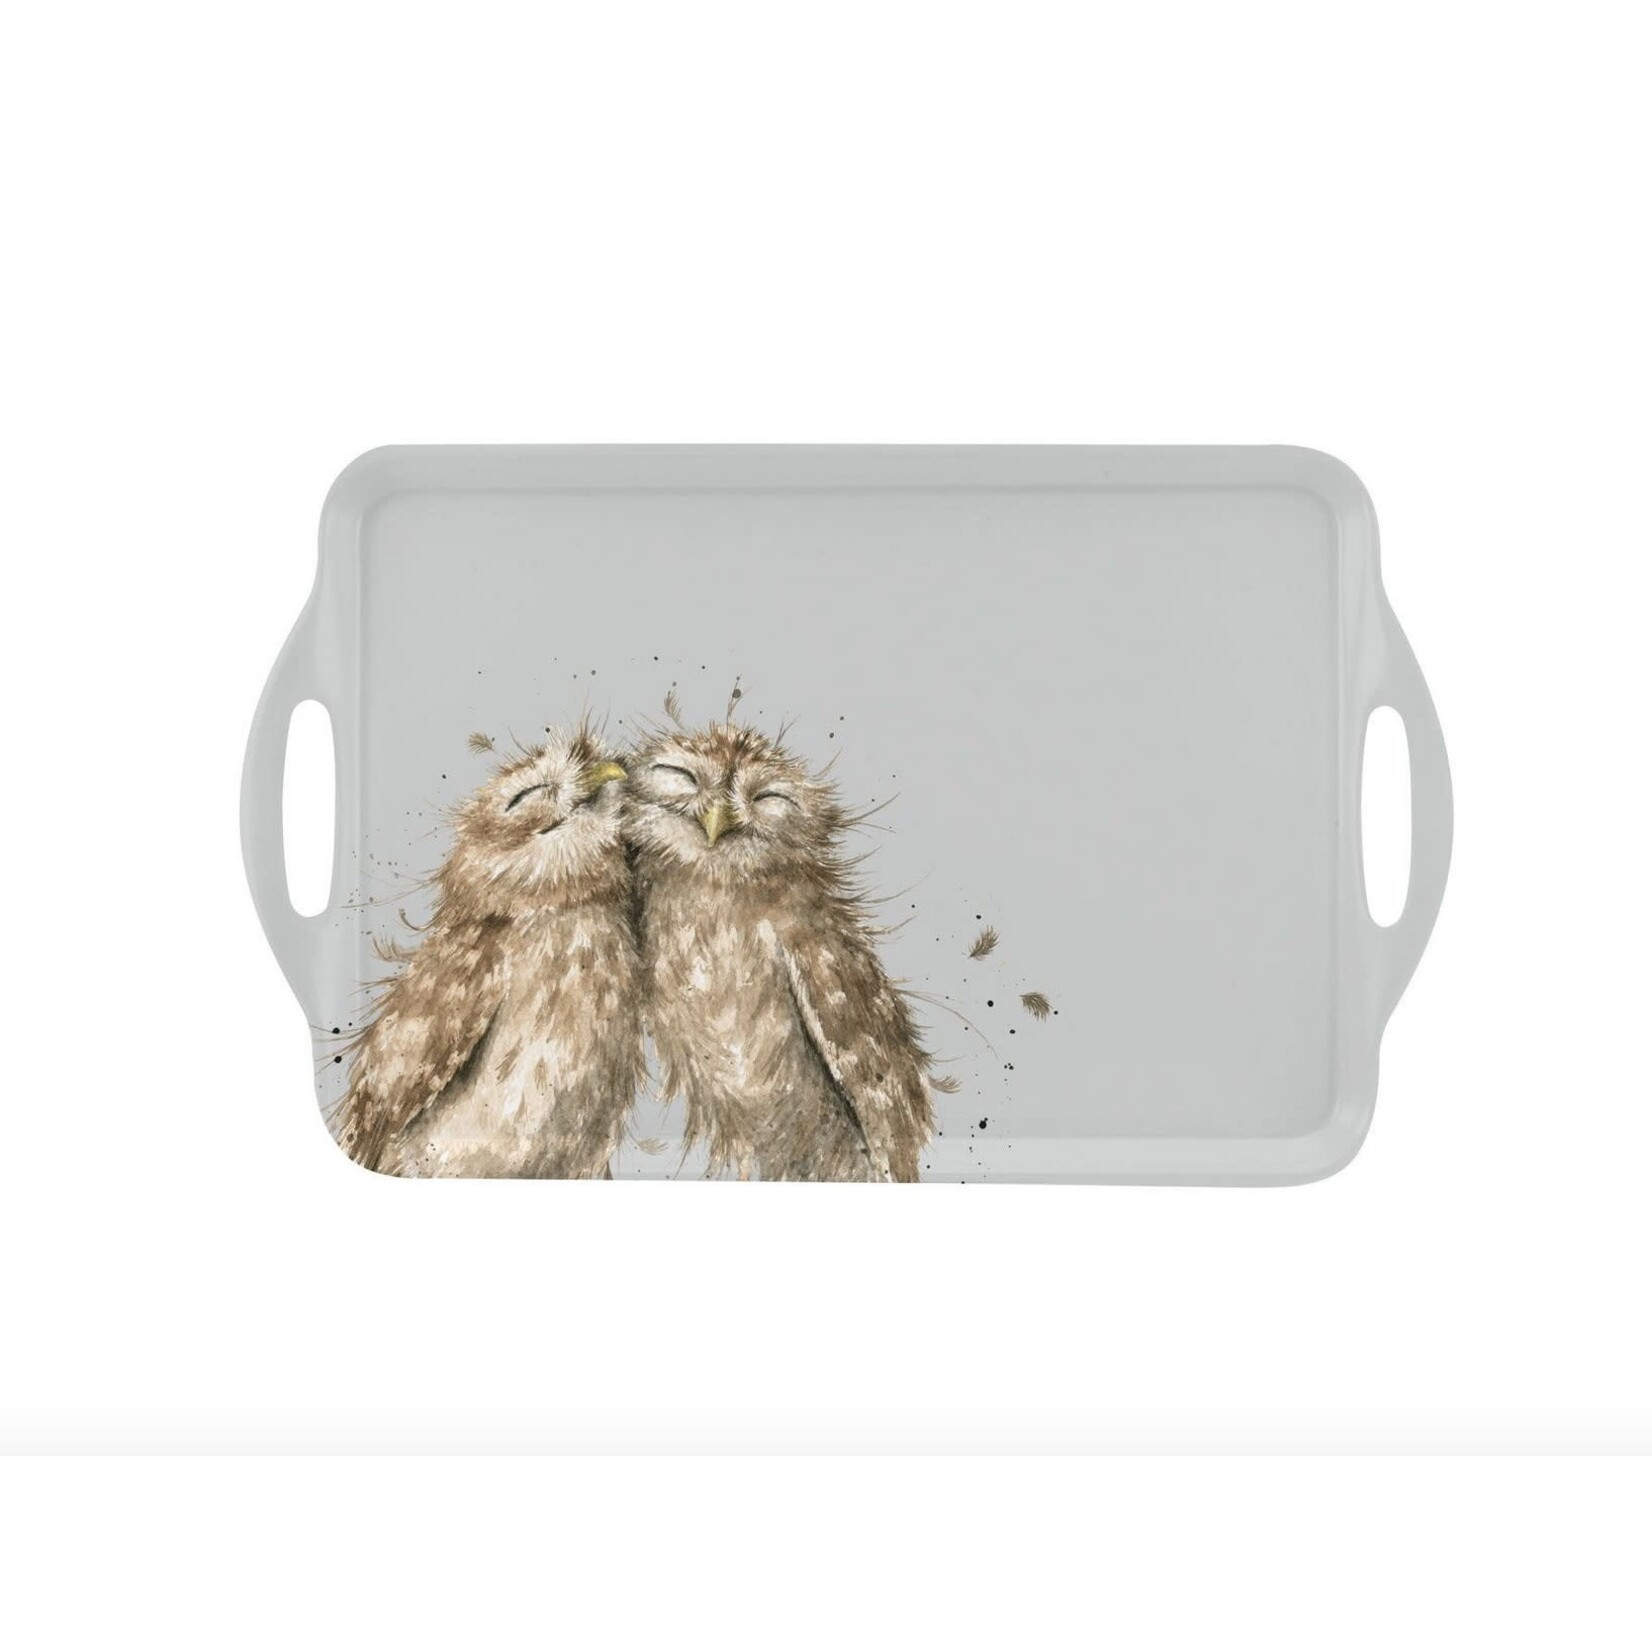 PIMPERNEL WRENDALE Owl Handle Tray Large 19x11.5"